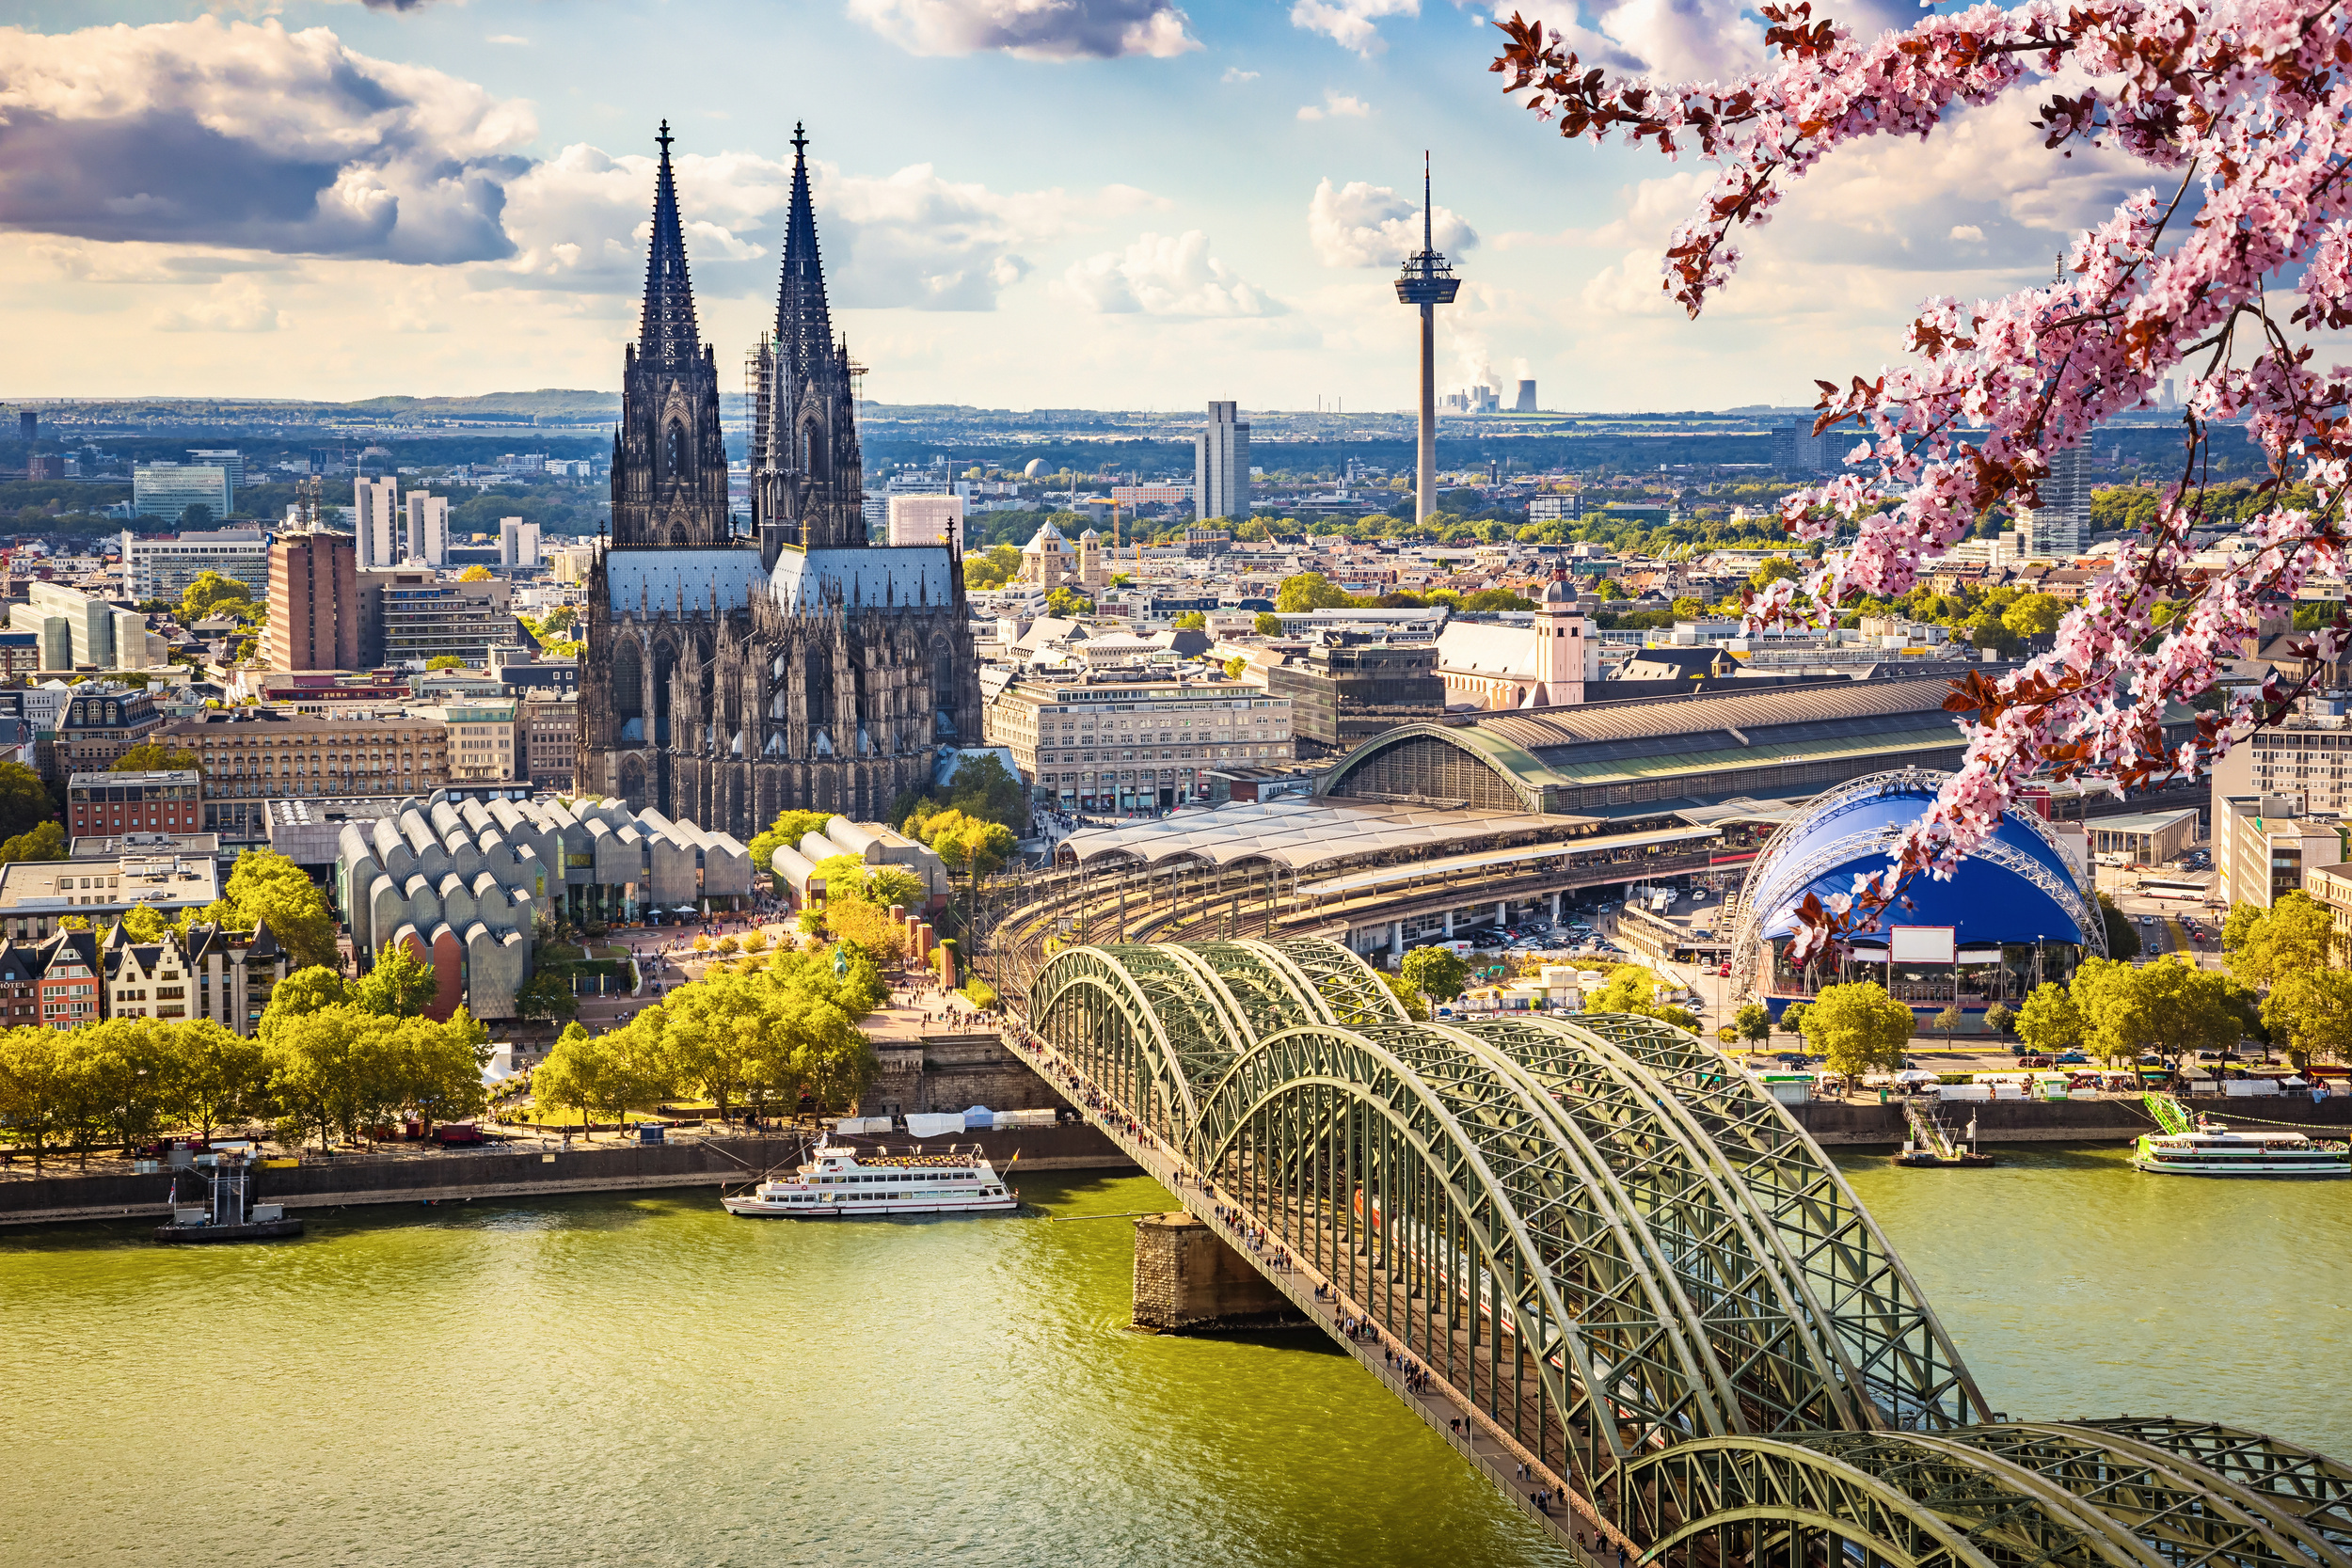 <p>This city in northern Germany is perfect for those looking for fantastic architecture and history. More popular in winter due to fantastic Christmas markets, you’ll surely have a less crowded experience in spring. And don’t forget to climb the cathedral steps for sweeping views of Cologne.</p><p>You may also like: <a href='https://www.yardbarker.com/lifestyle/articles/the_21_best_beaches_on_the_west_coast_021824/s1__39136863'>The 21 best beaches on the West Coast</a></p>